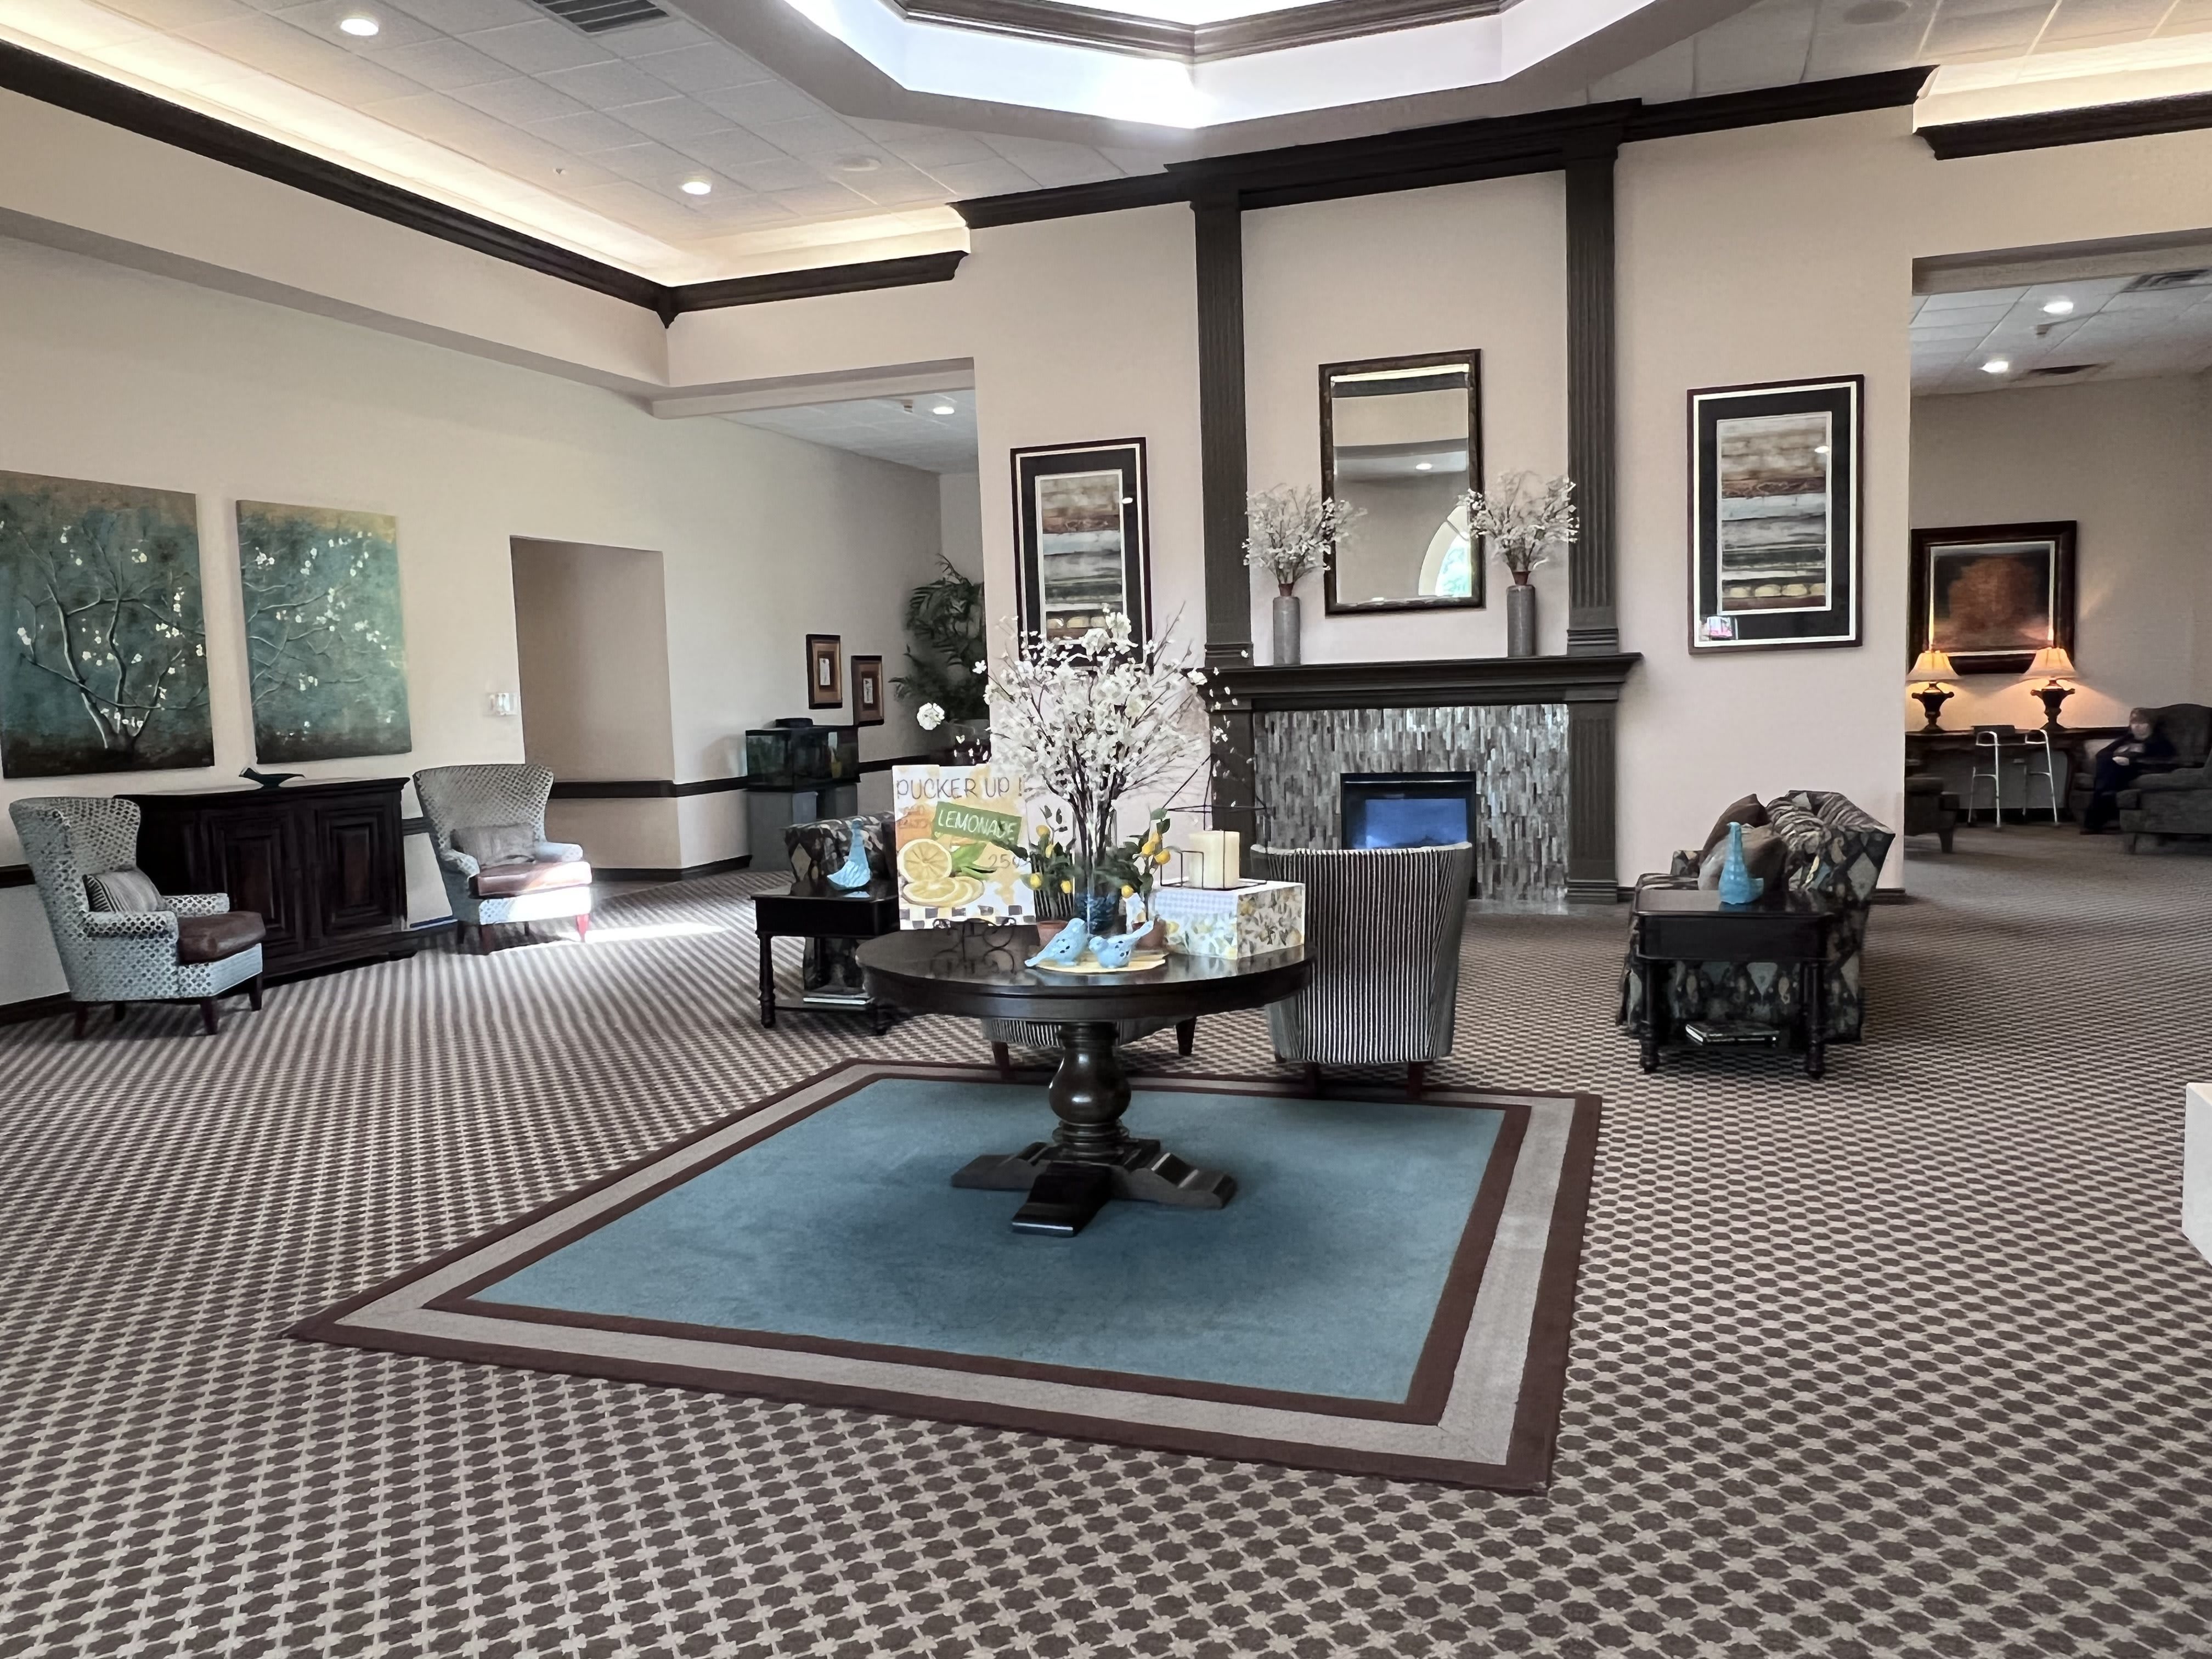 Arbor House Assisted Living lobby